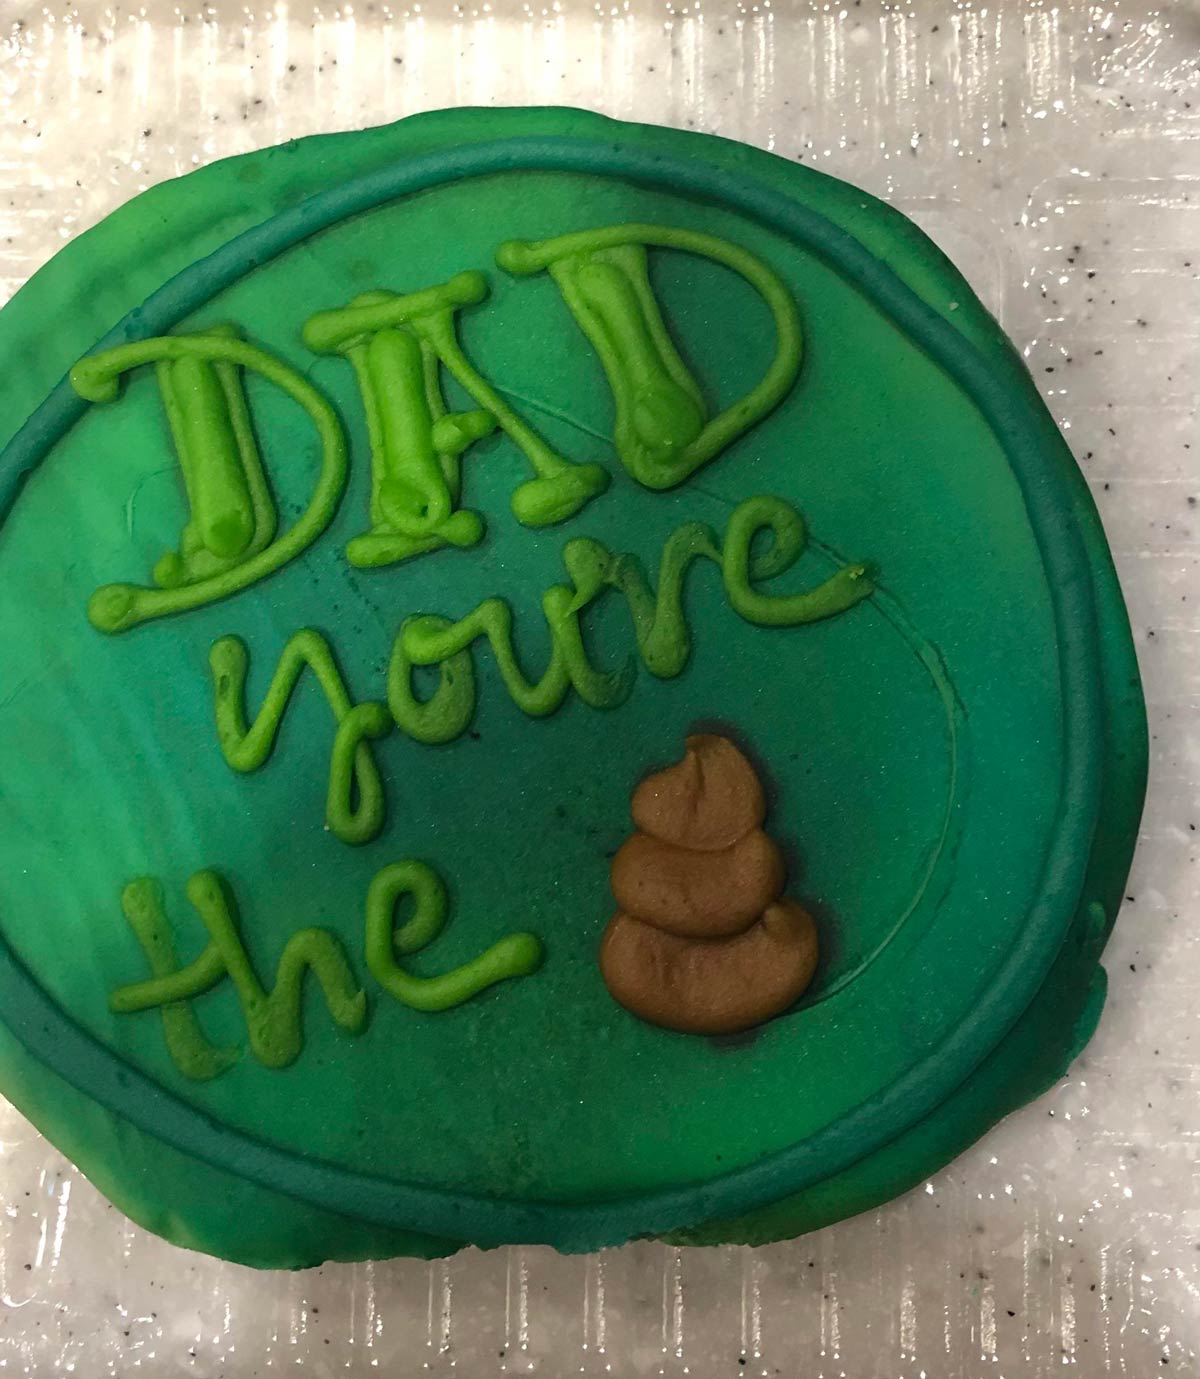 Couldn’t have asked for a better Father’s Day dessert